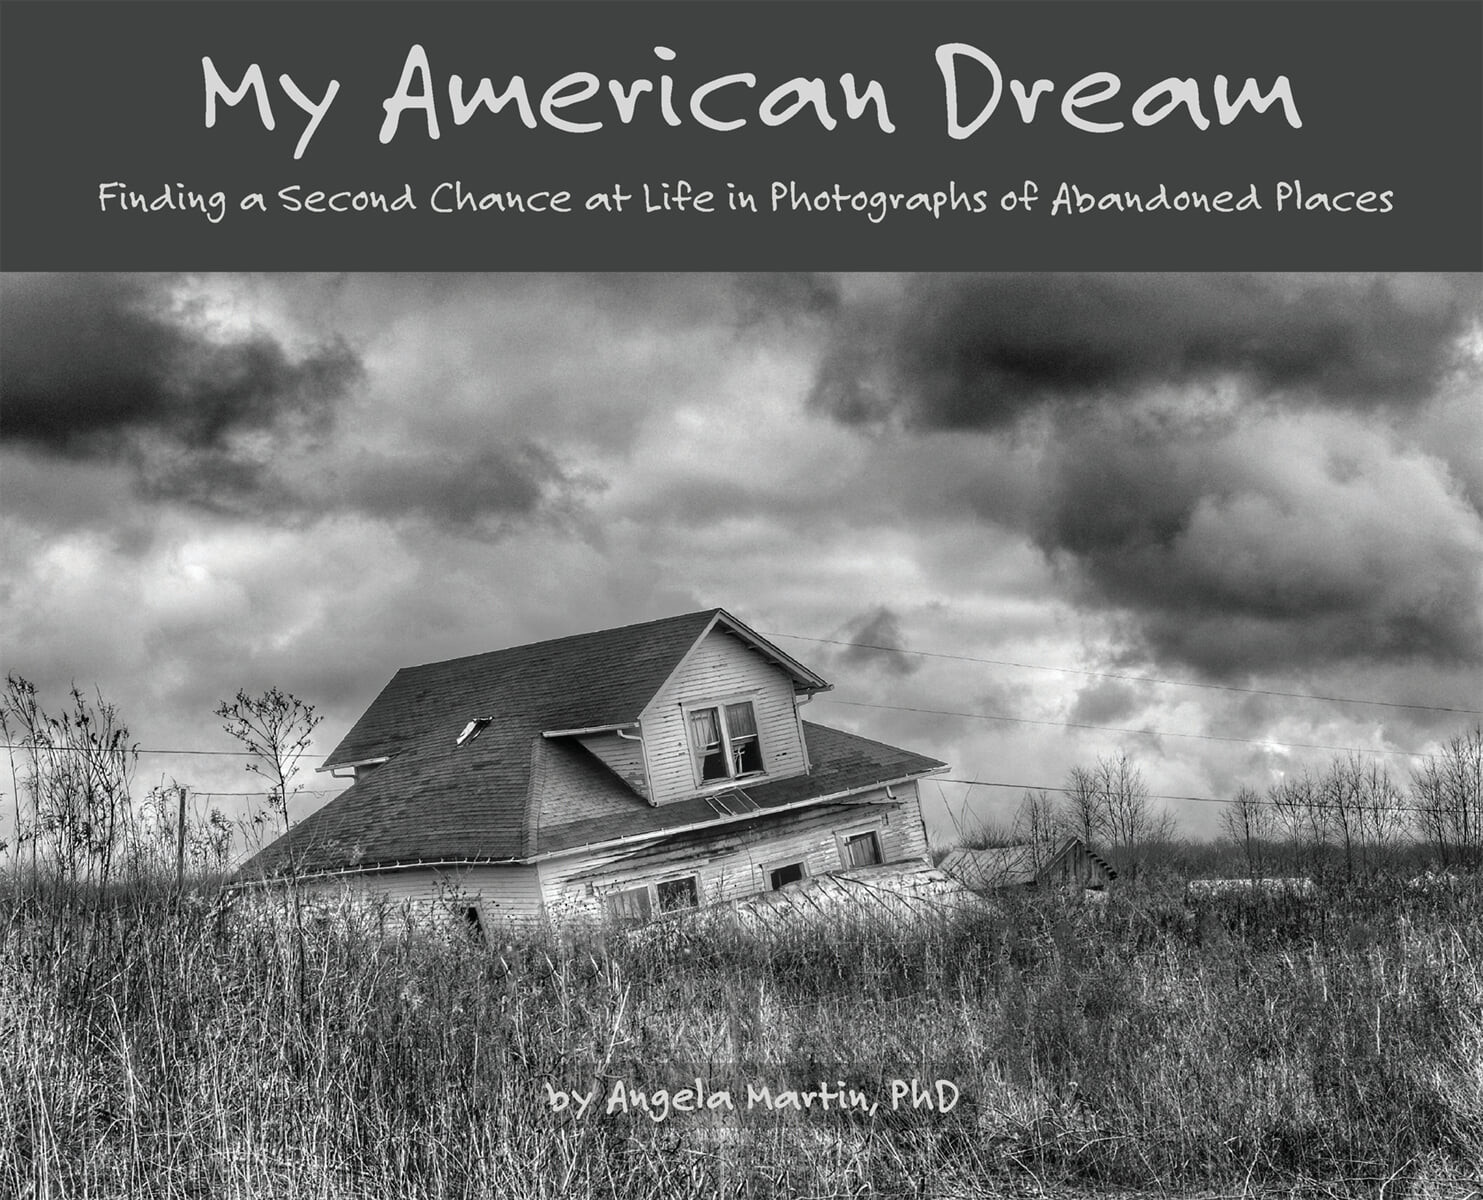 My American Dream: Finding a Second Chance at Life in Photographs of Abandoned Places